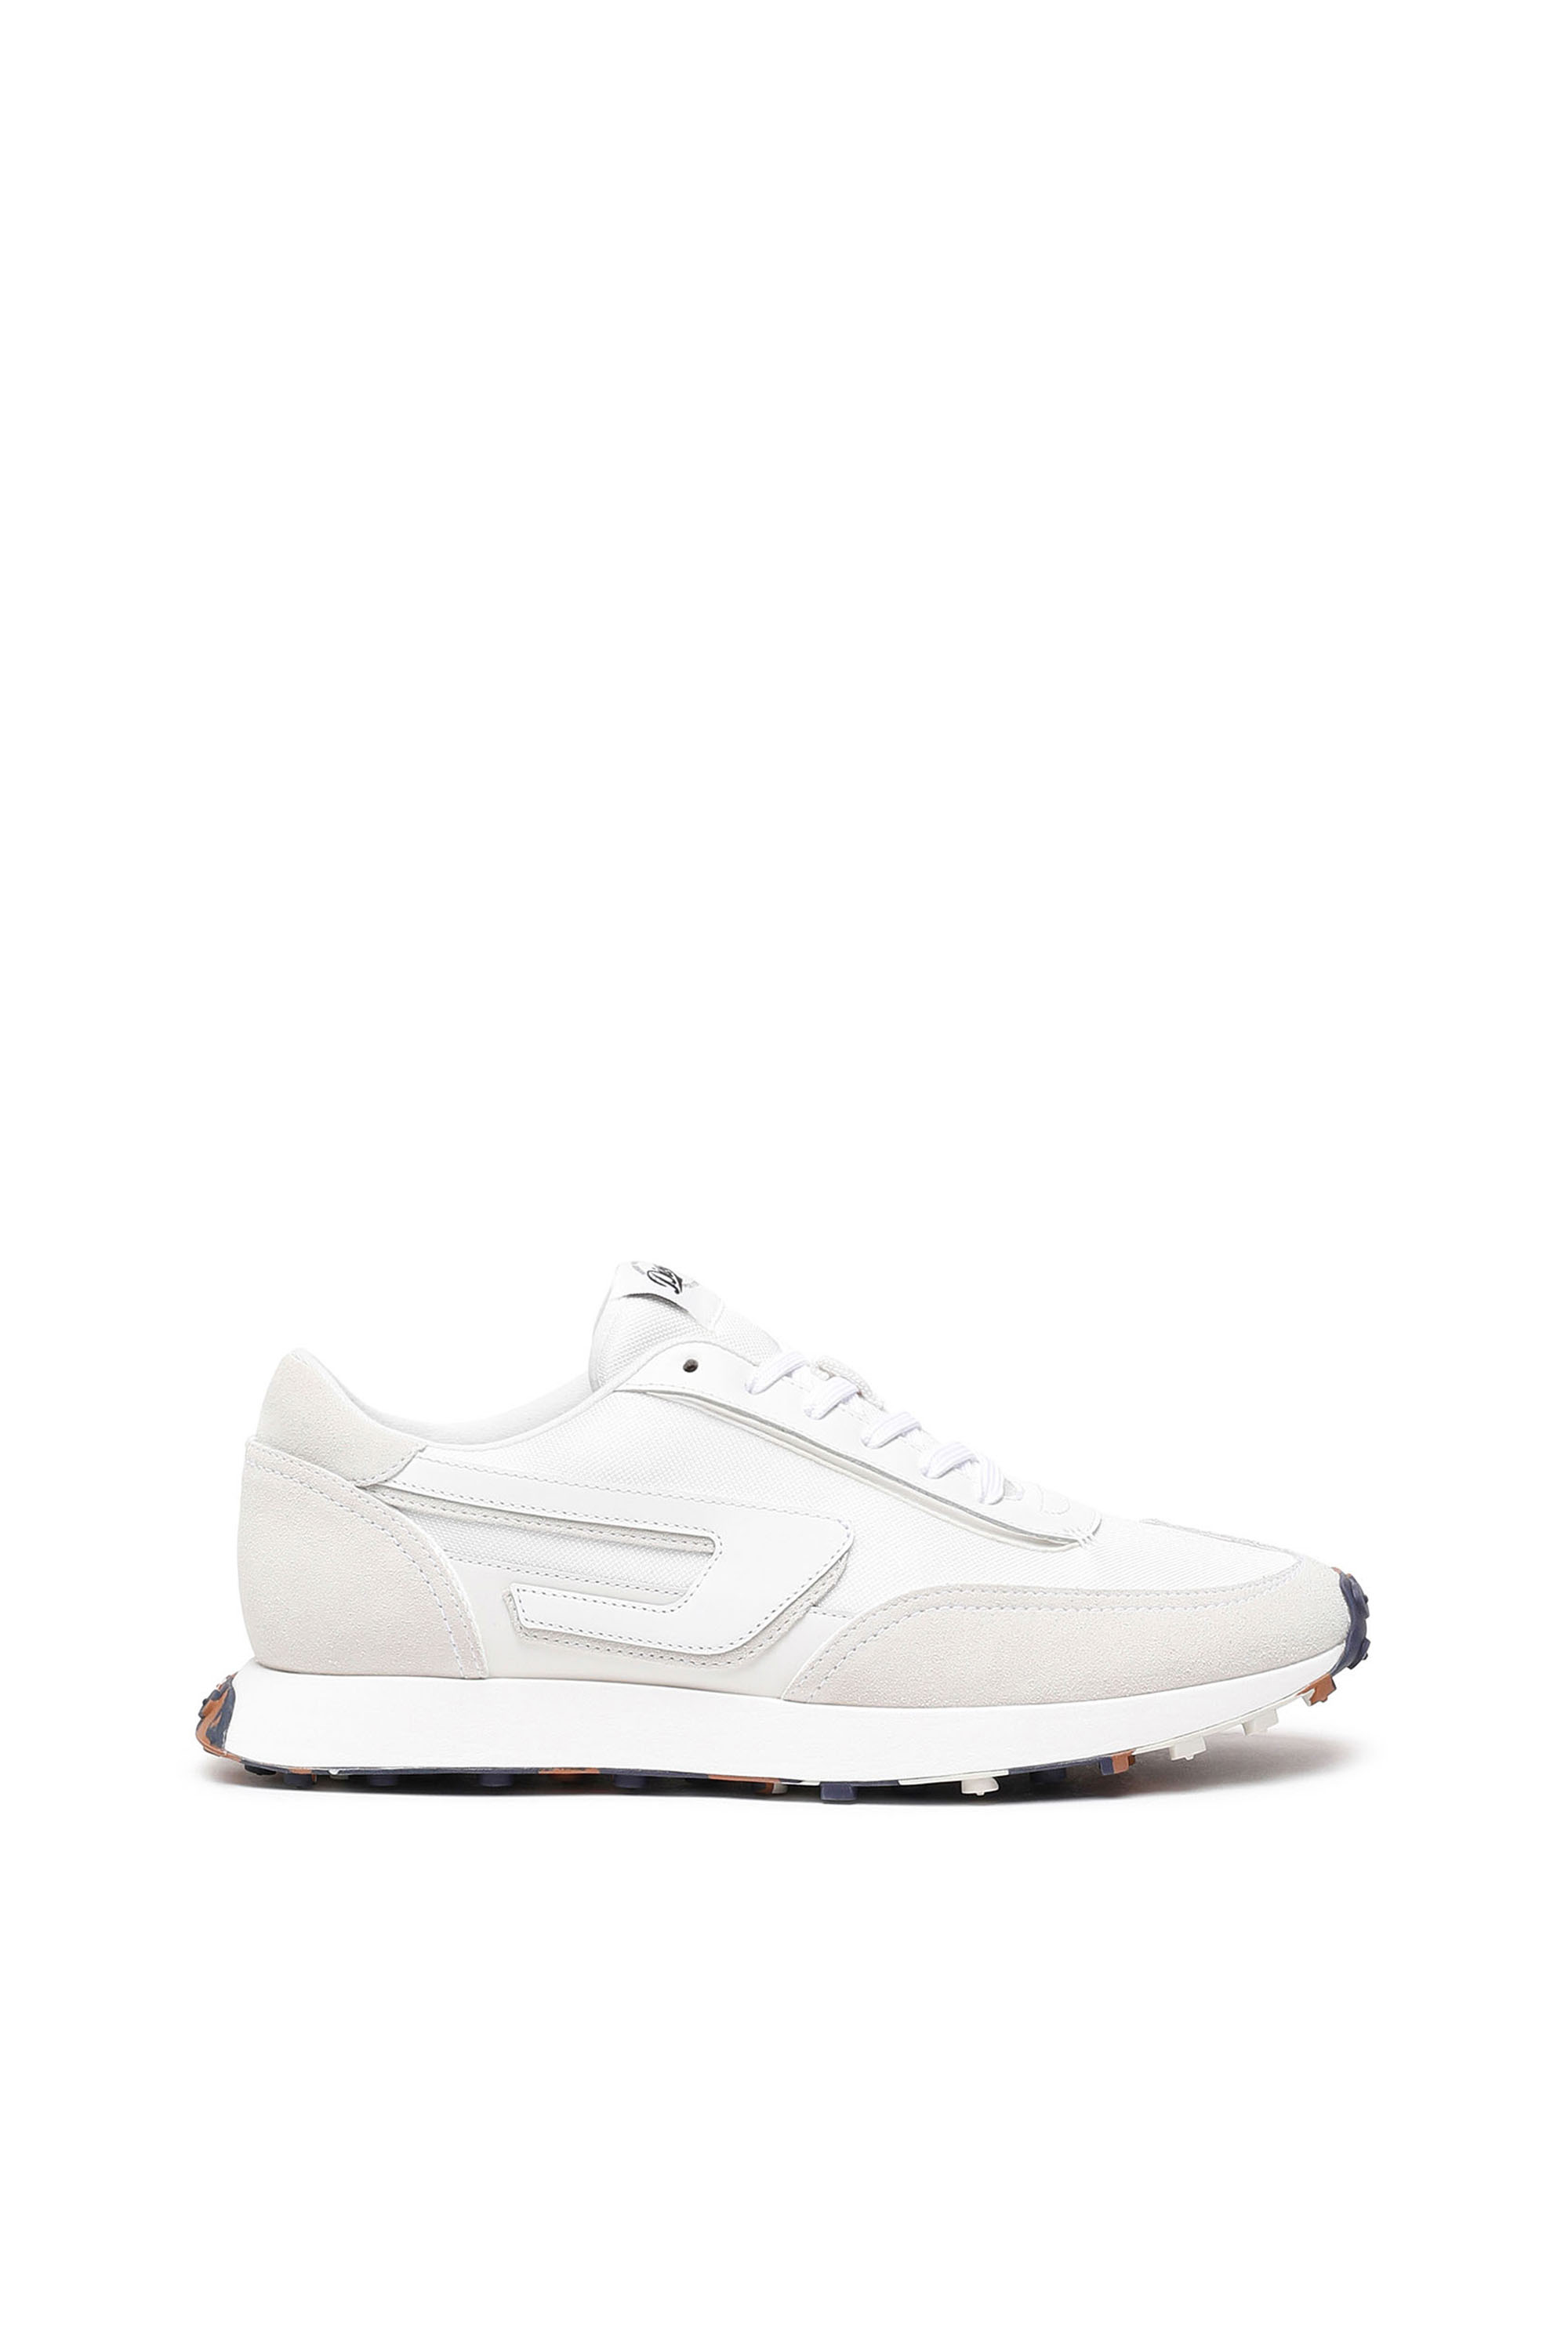 Diesel Mesh And Suede Trainers With Camo Sole In White